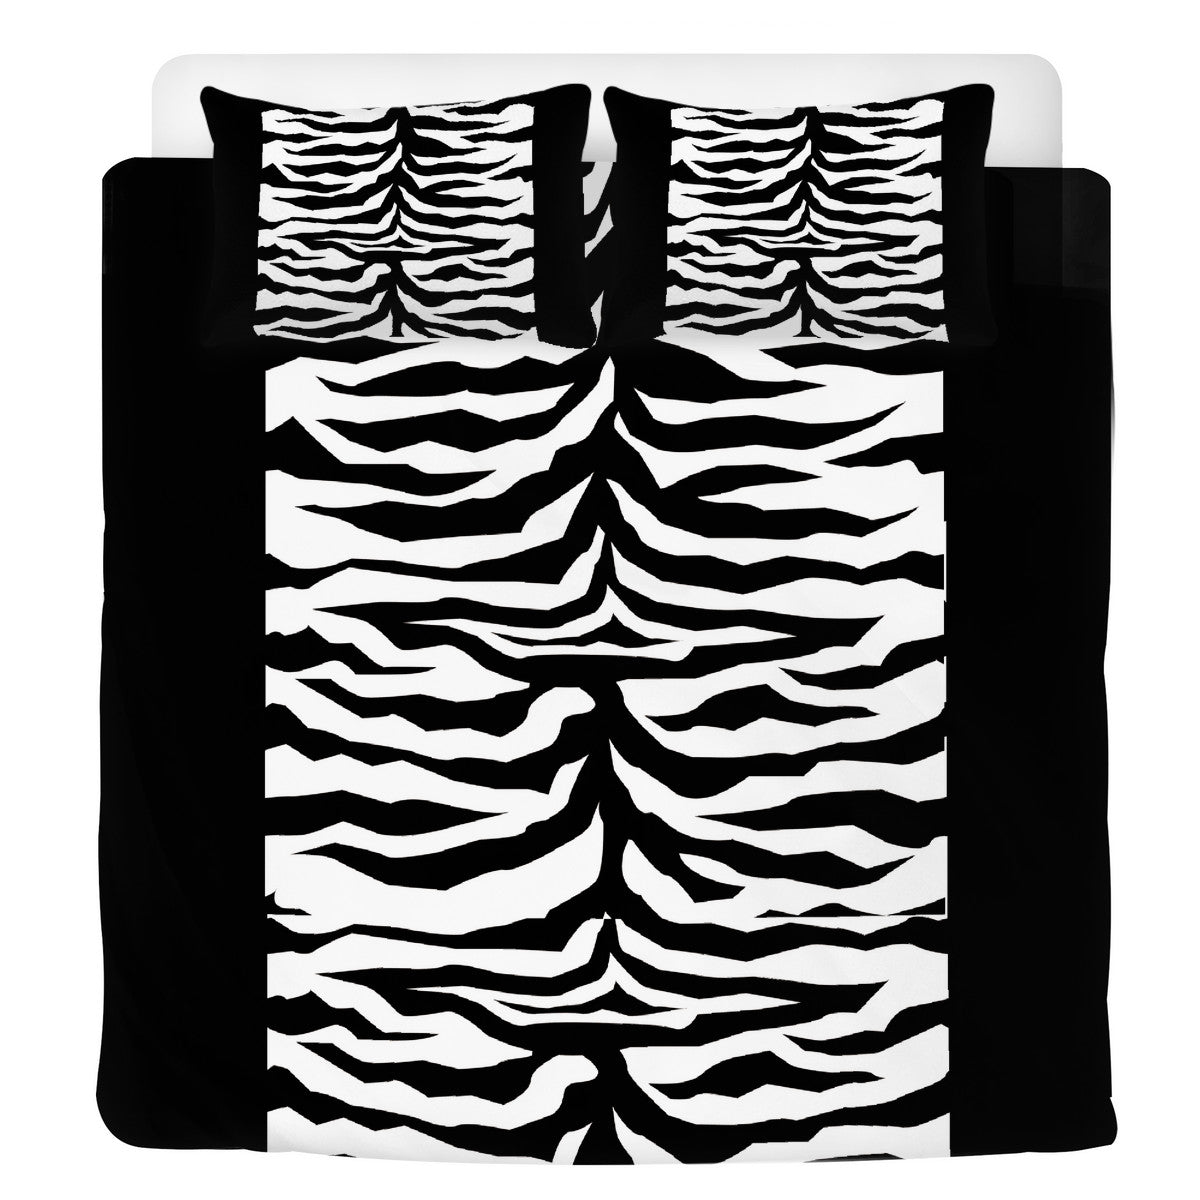 Bedding Tiger Black White Home-clothes-jewelry